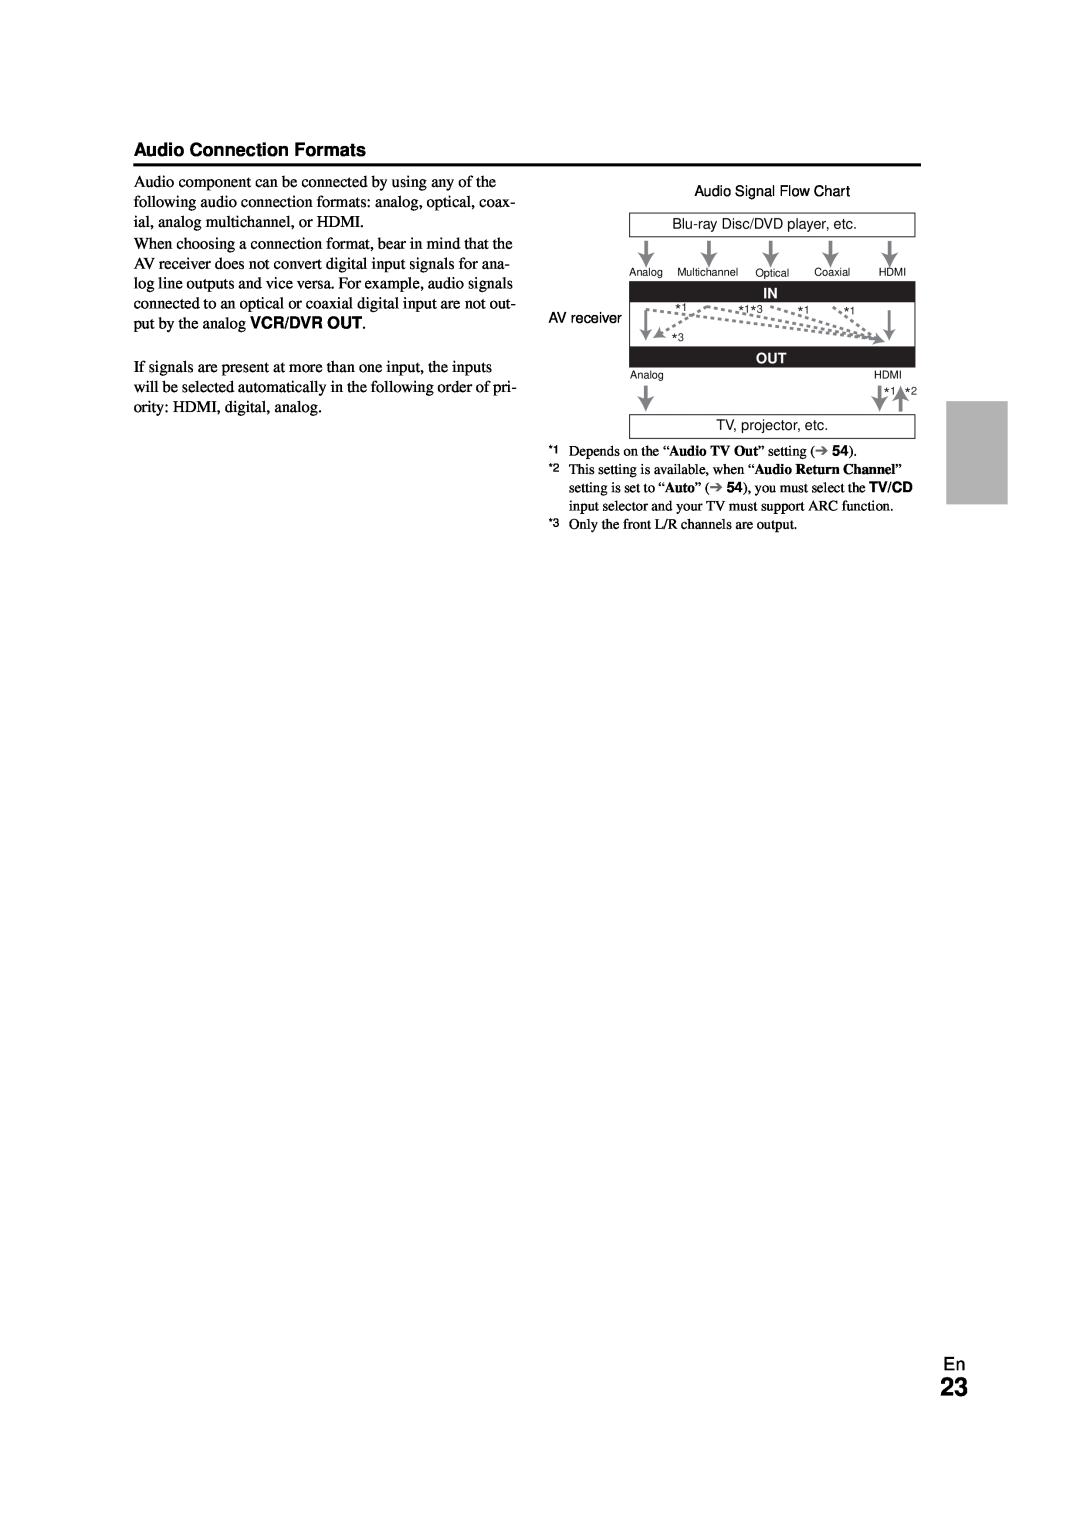 Onkyo HT-RC270 instruction manual Audio Connection Formats 